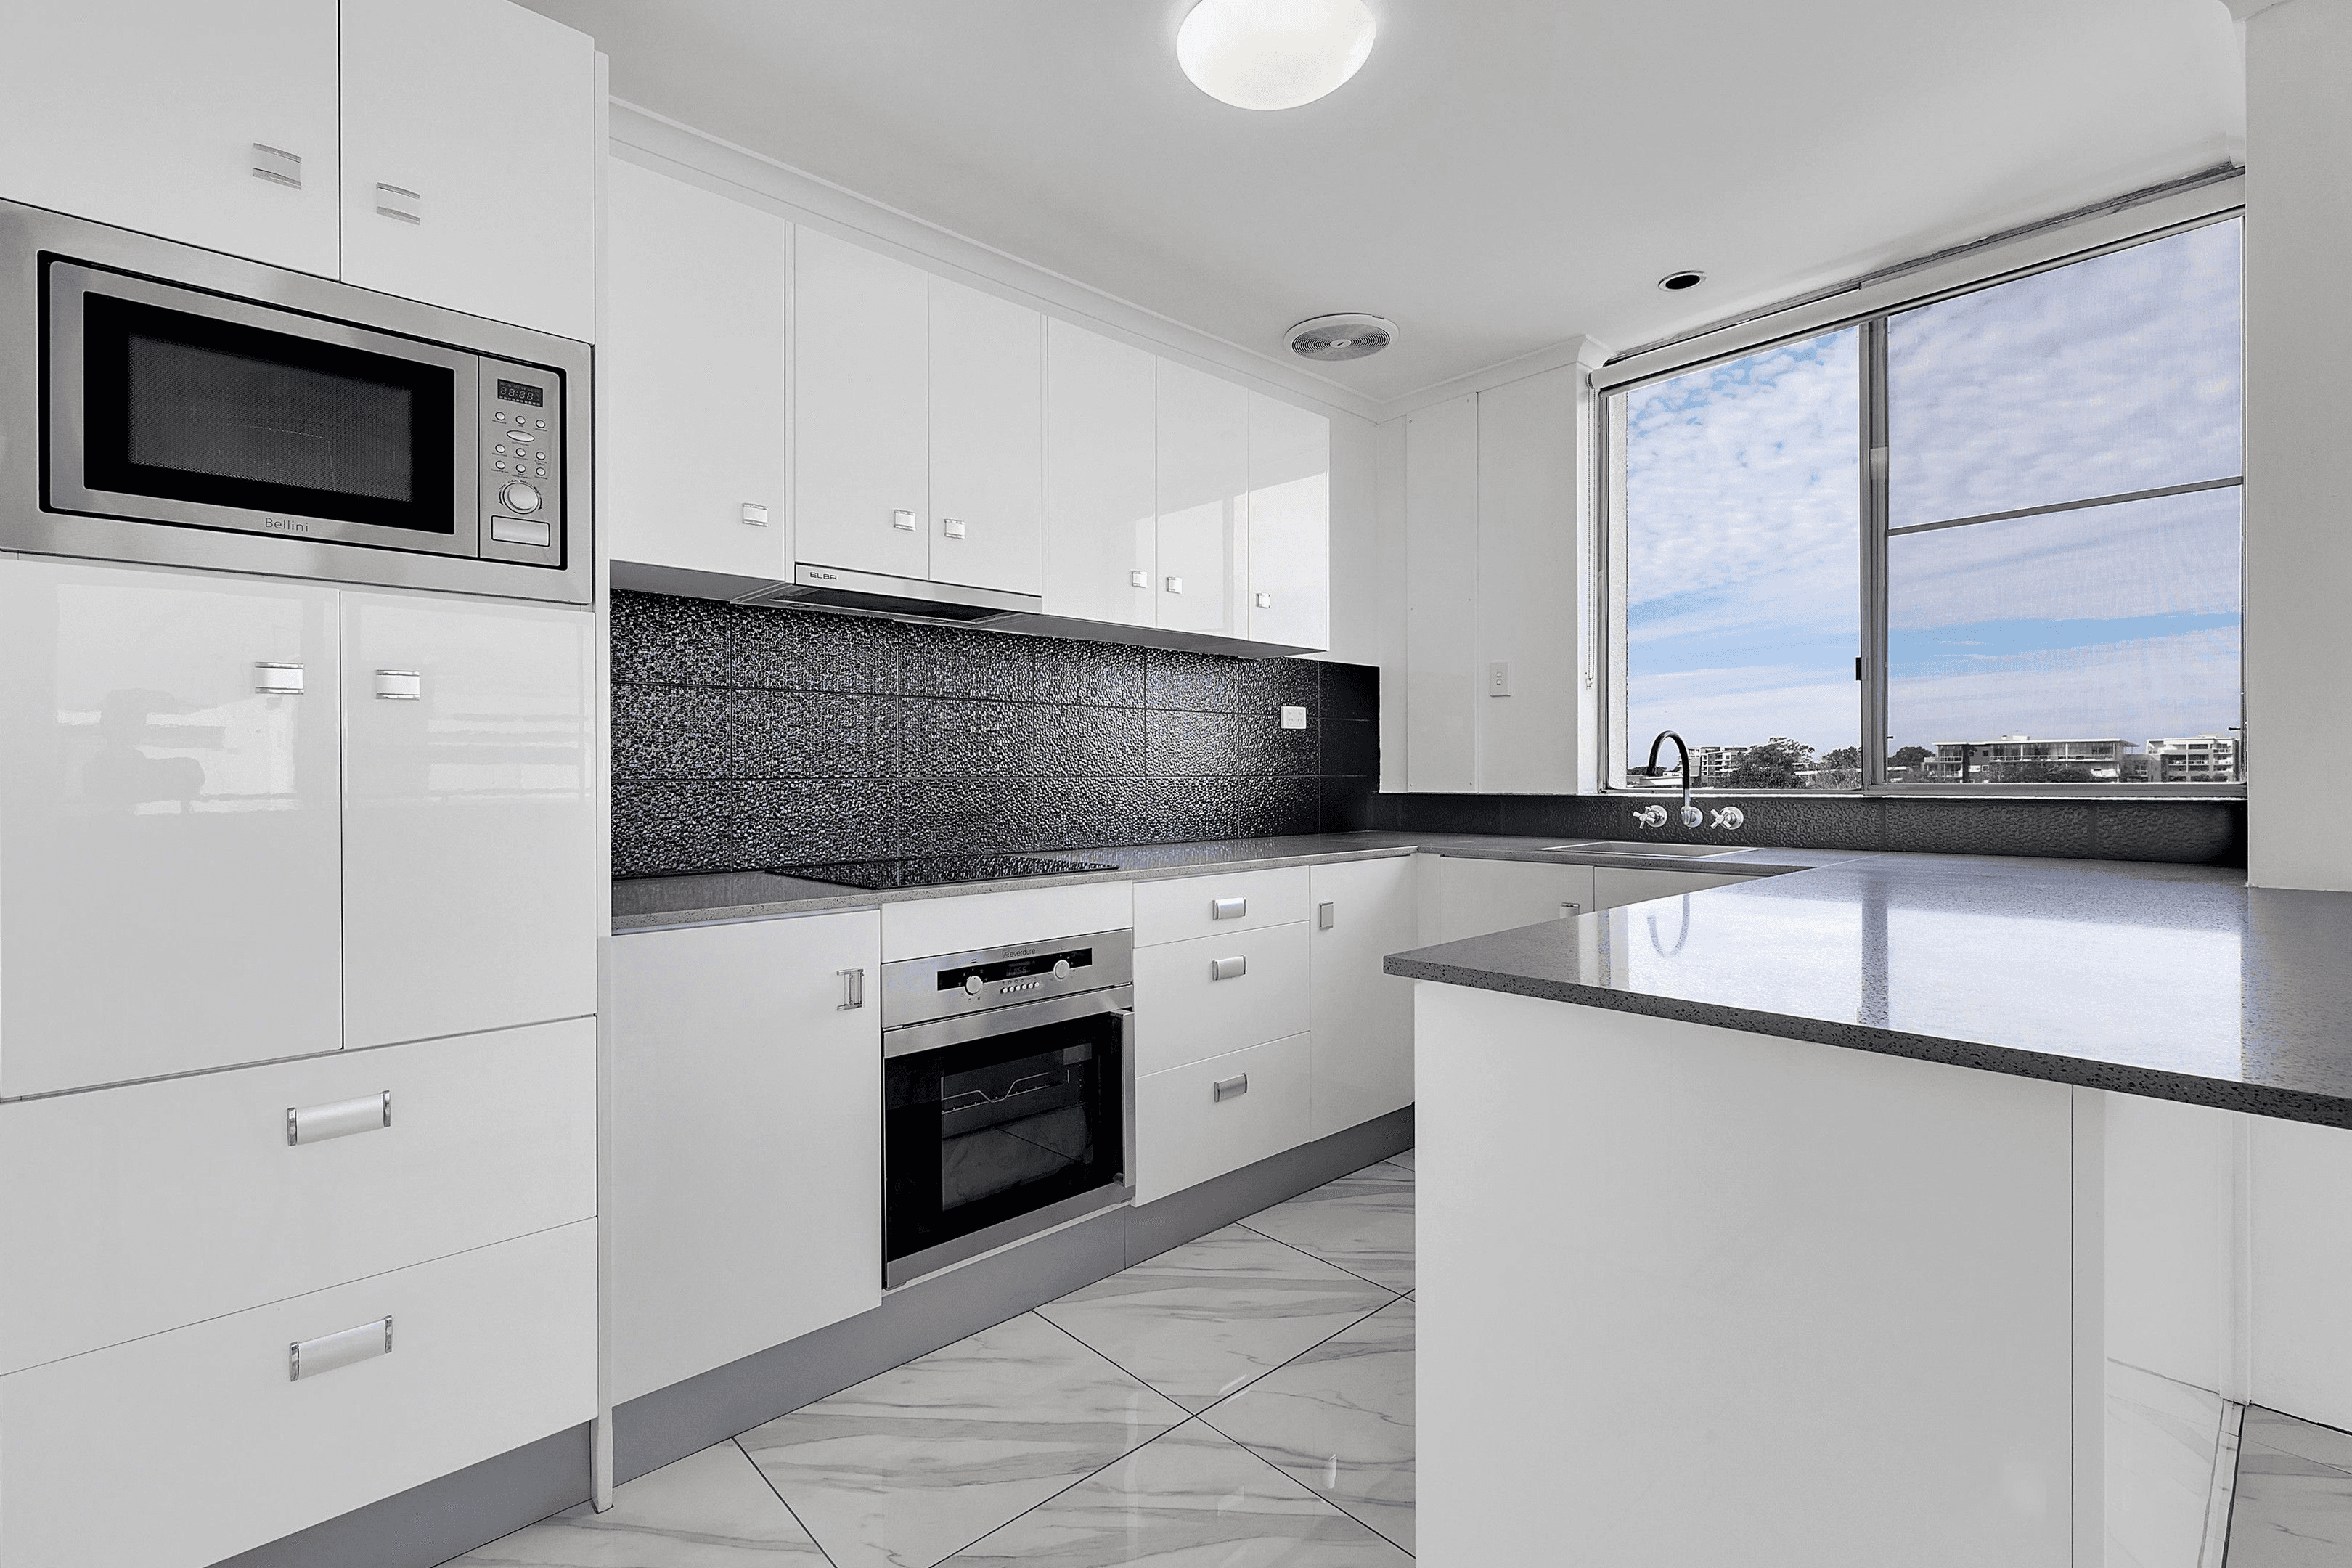 8/12 Underhill Ave, Indooroopilly, QLD 4068